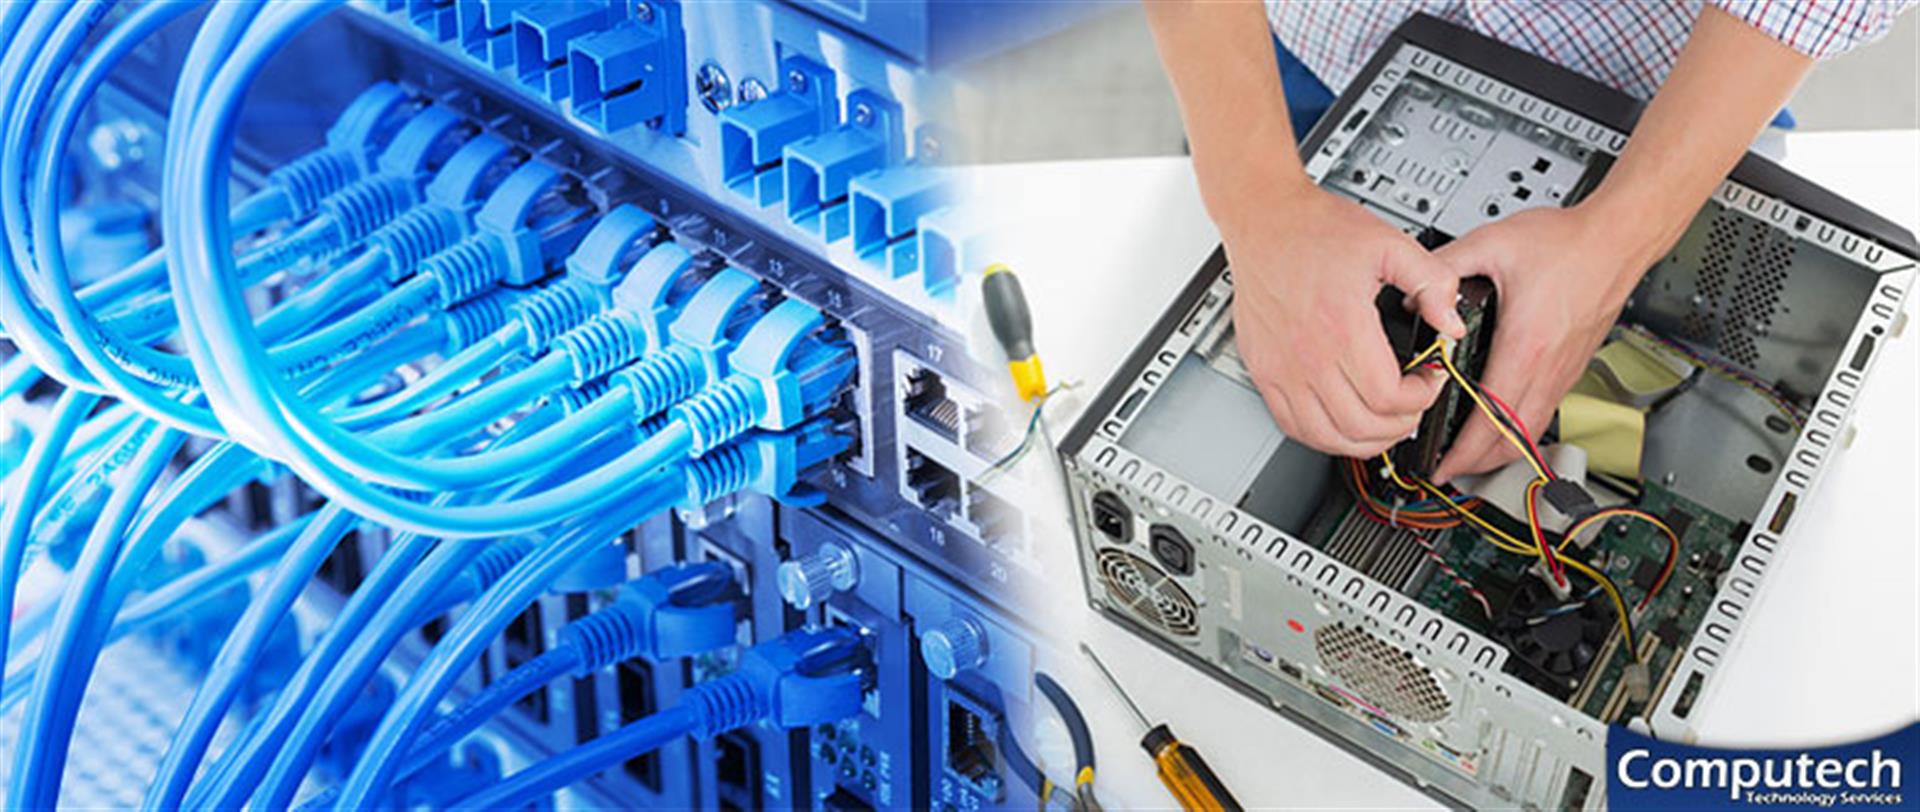 Mount Carmel Tennessee On-Site PC & Printer Repair, Networks, Voice & Data Cabling Solutions